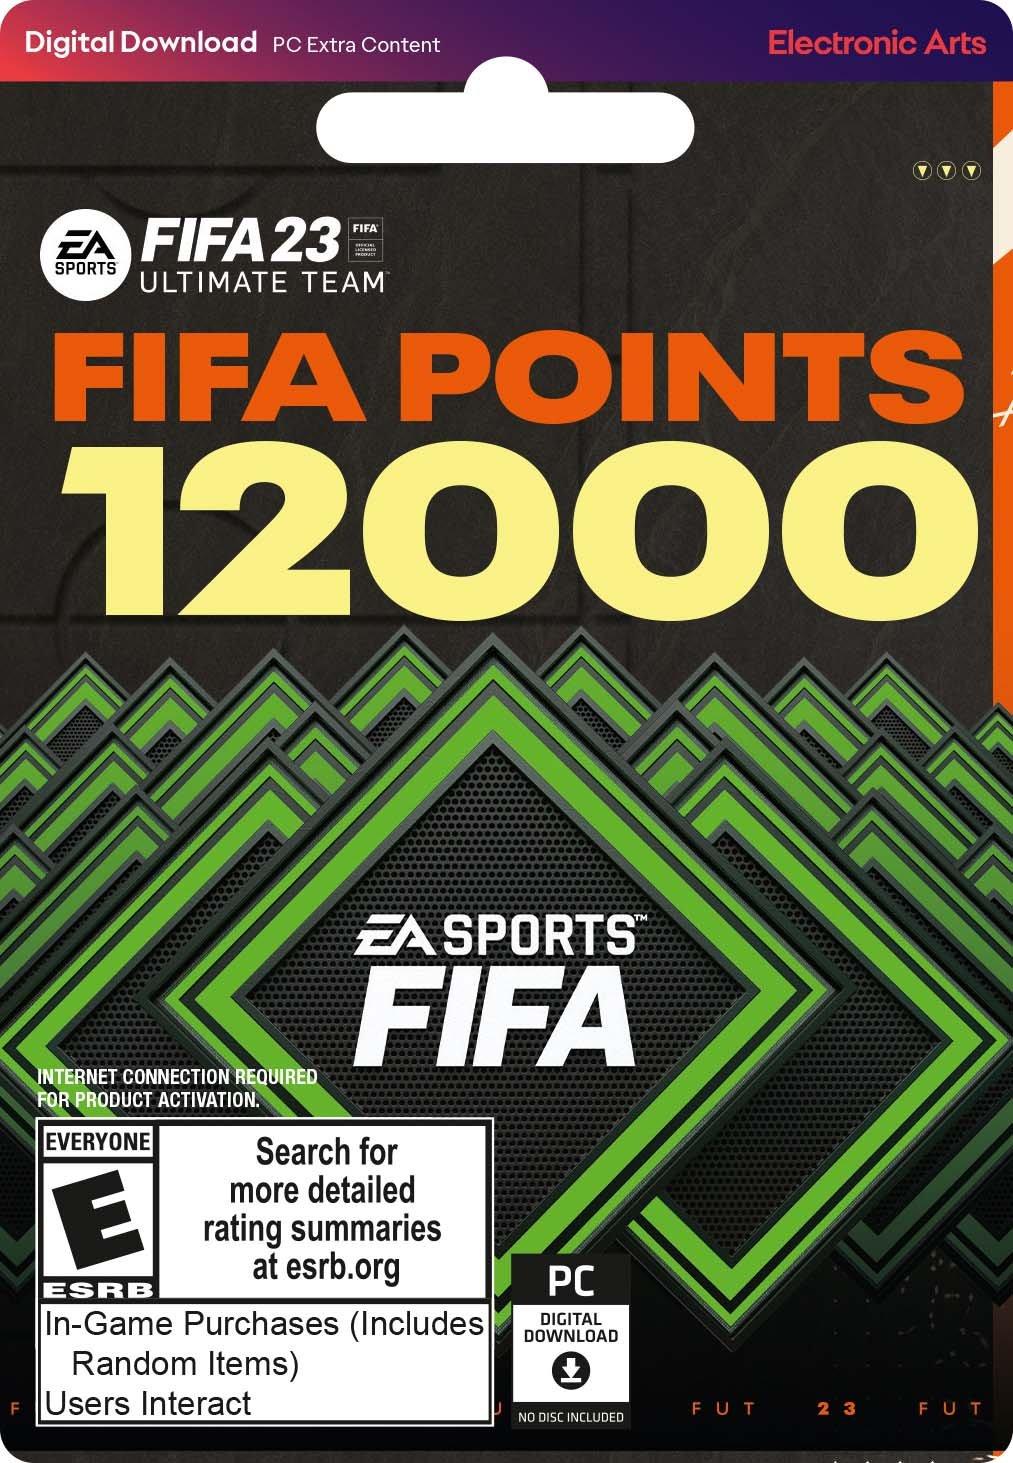 FIFA 23 Ultimate Edition: Where are my FIFA Points? Where is my Ones to  Watch Item?